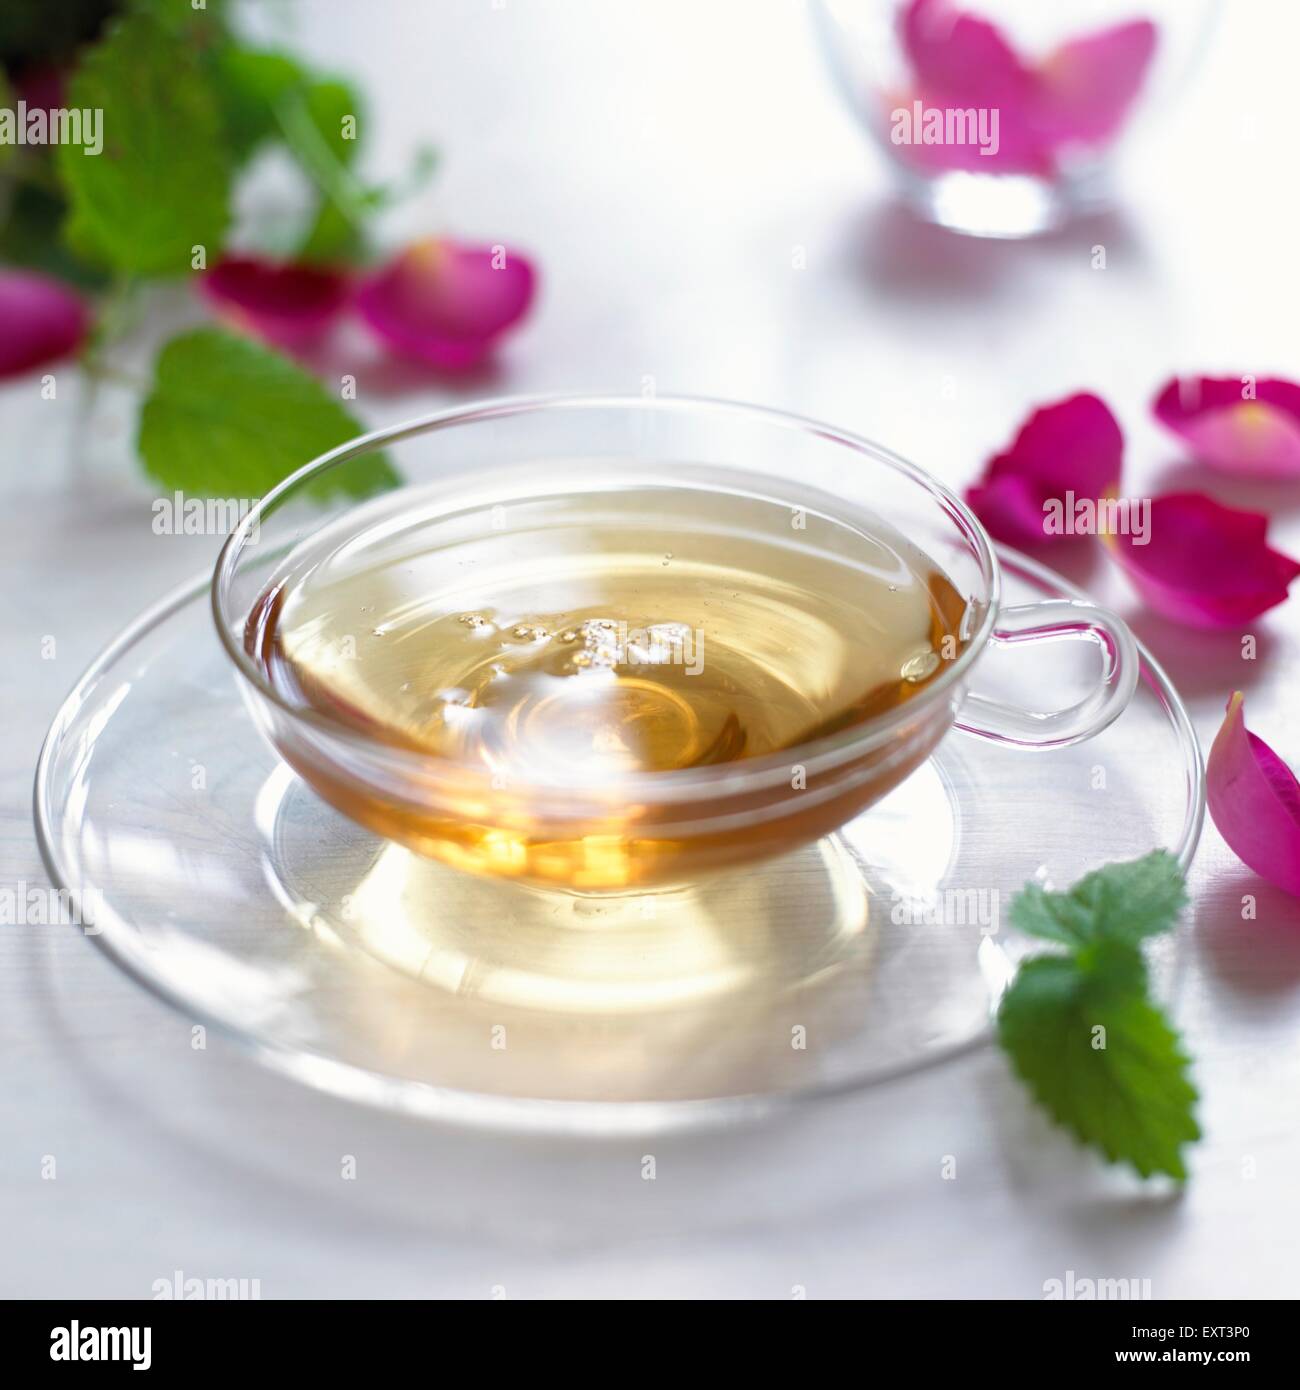 Rose lemon tea in glass cup, close-up Stock Photo